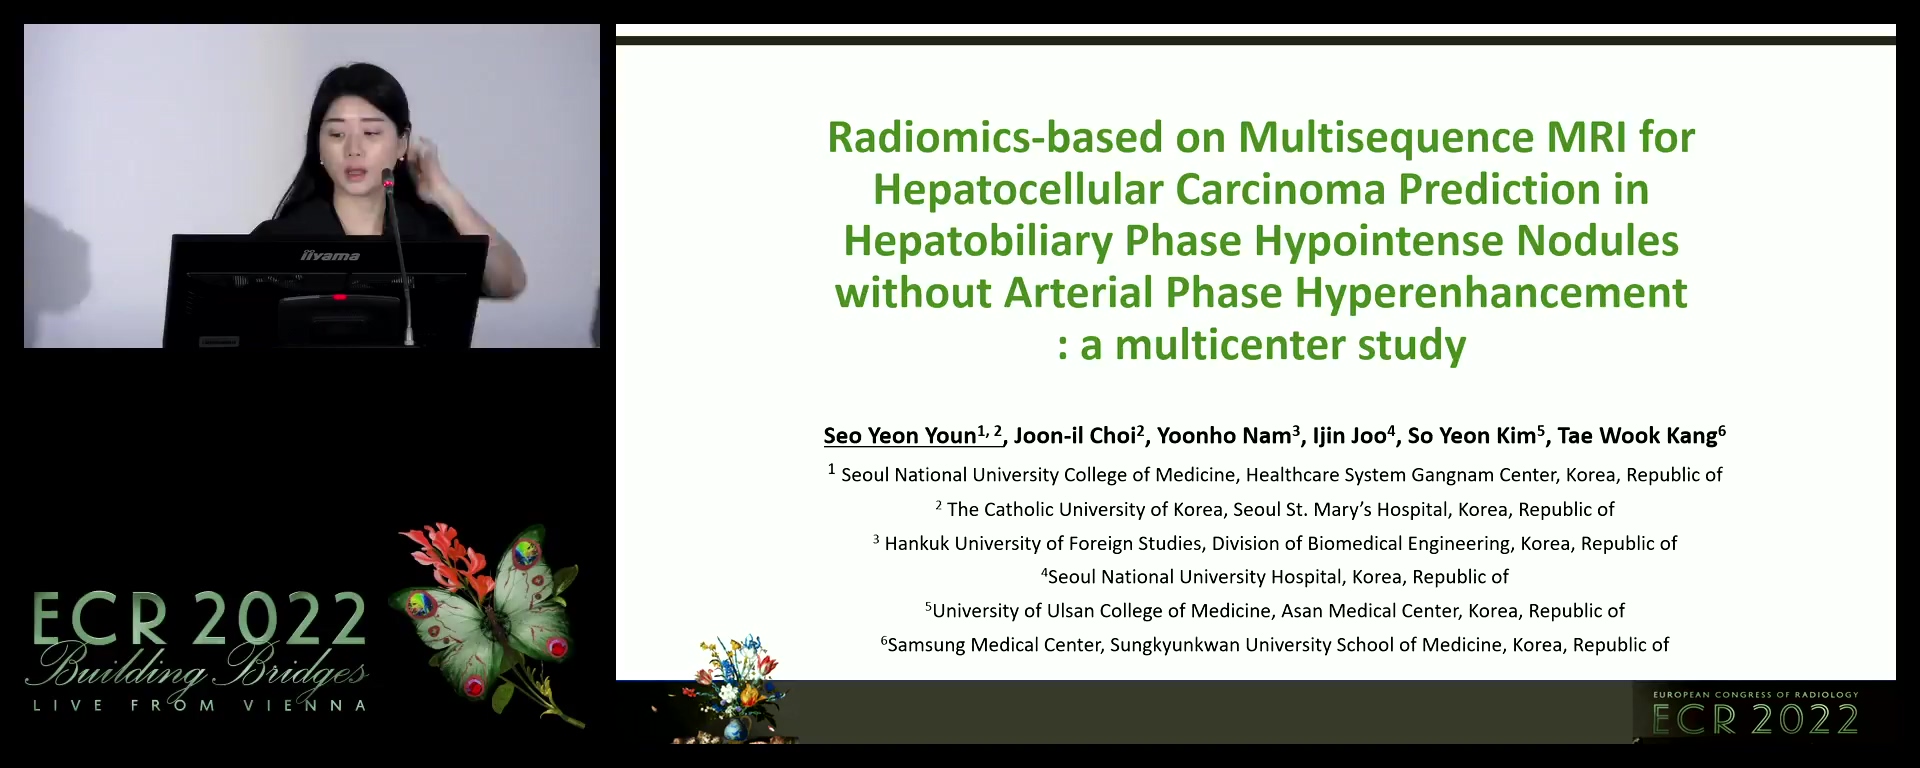 Radiomics-based on multisequence MRI for hepatocellular carcinoma prediction in hepatobiliary phase hypointense nodules without arterial phase hyperenhancement: a multicentre study - Seo Yeon Youn, Seoul / KR